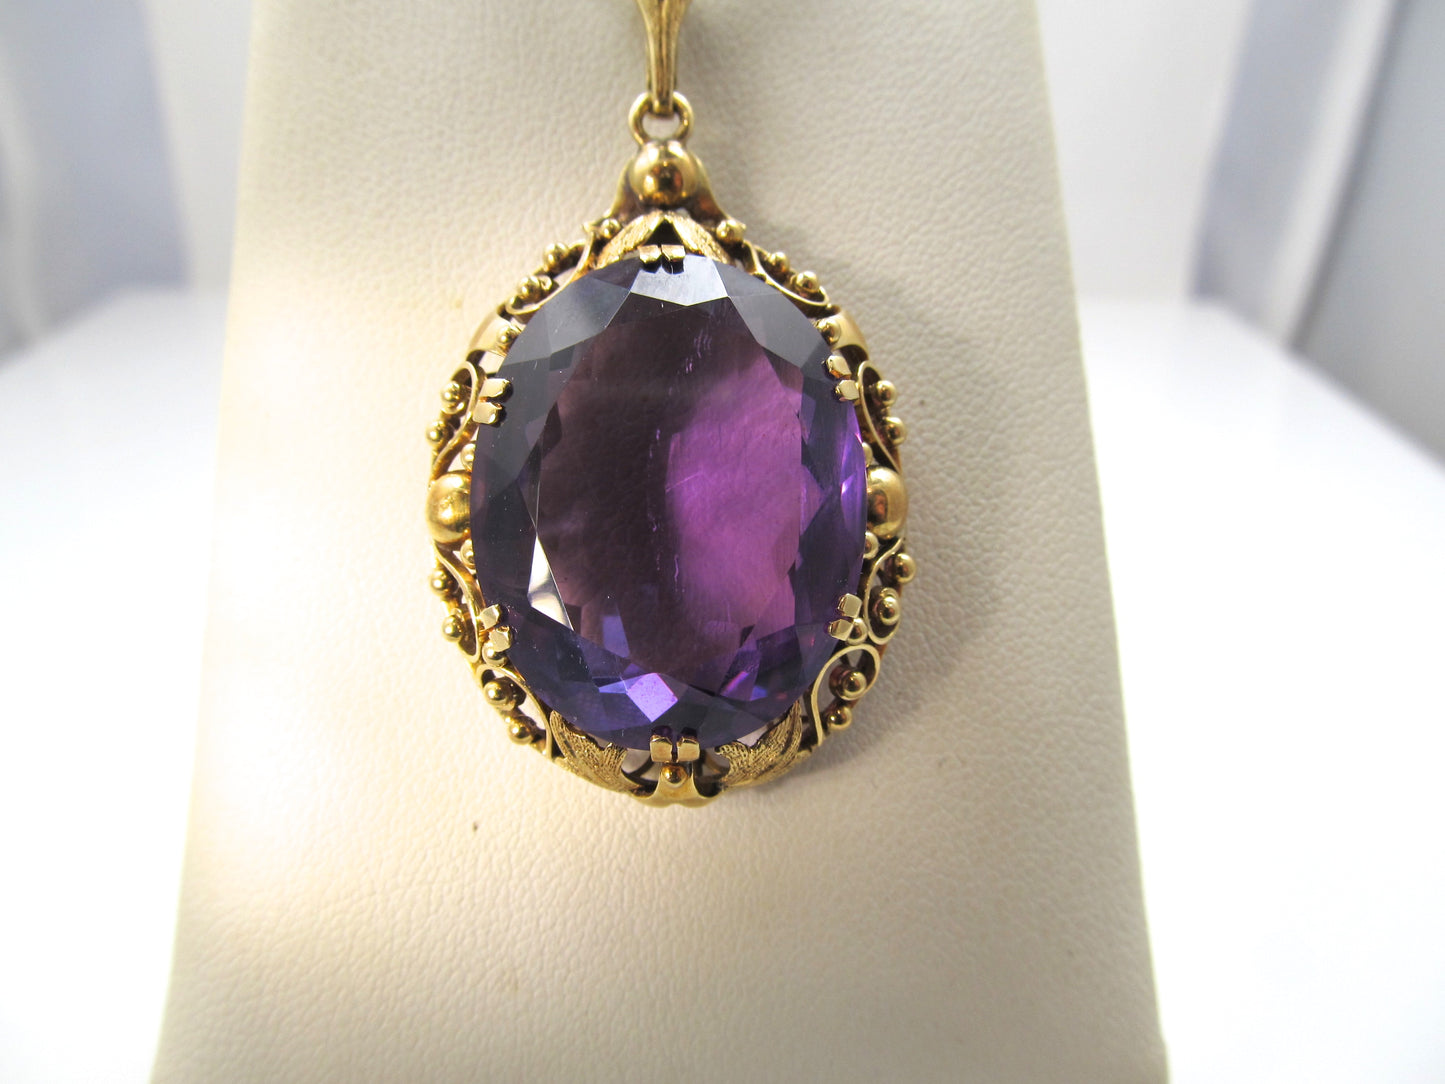 Vintage 14k yellow gold necklace with a large amethyst